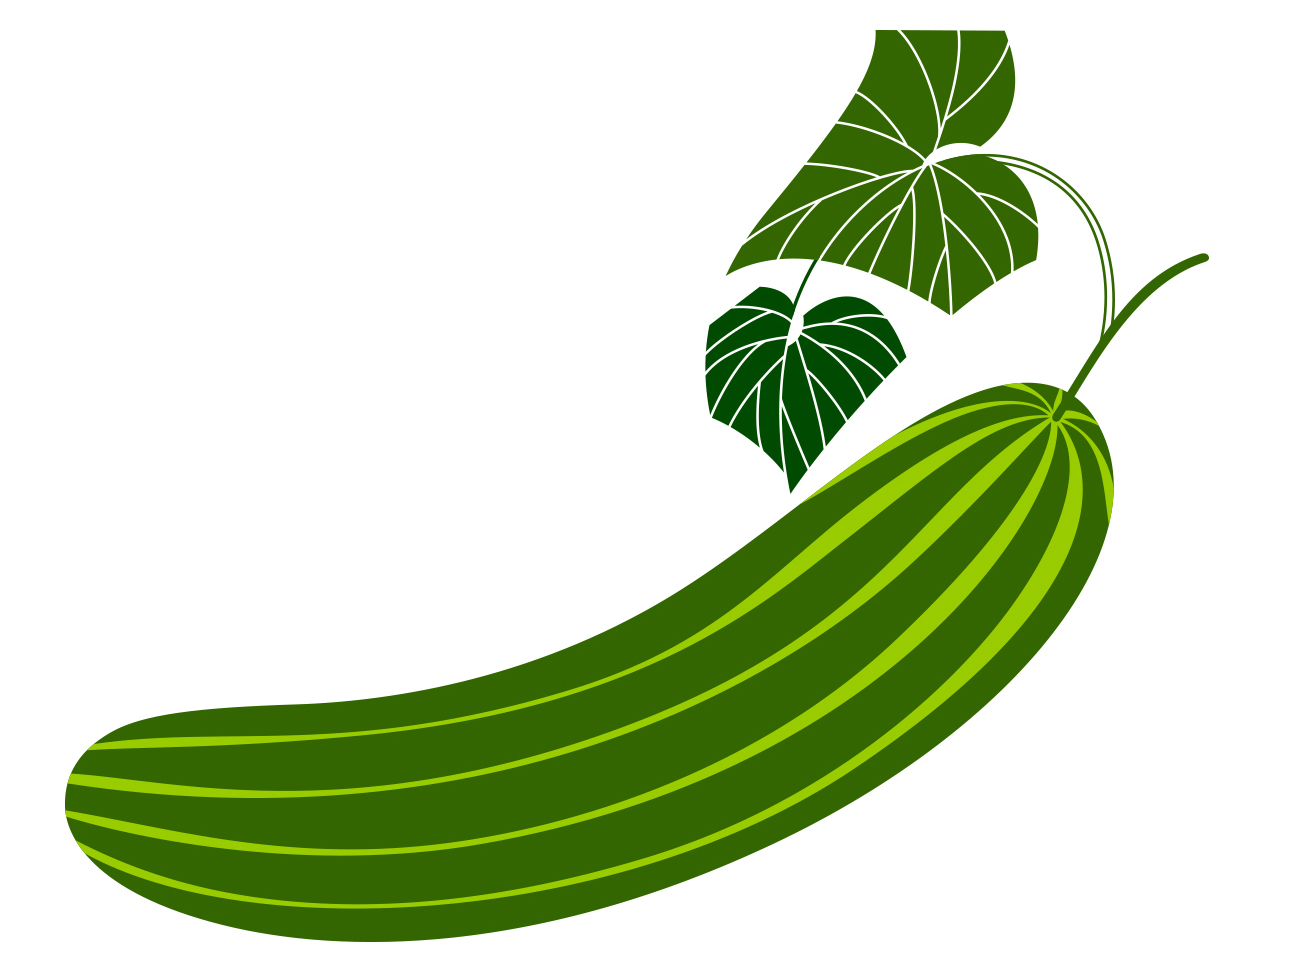 Zucchini Drawing at GetDrawings Free download